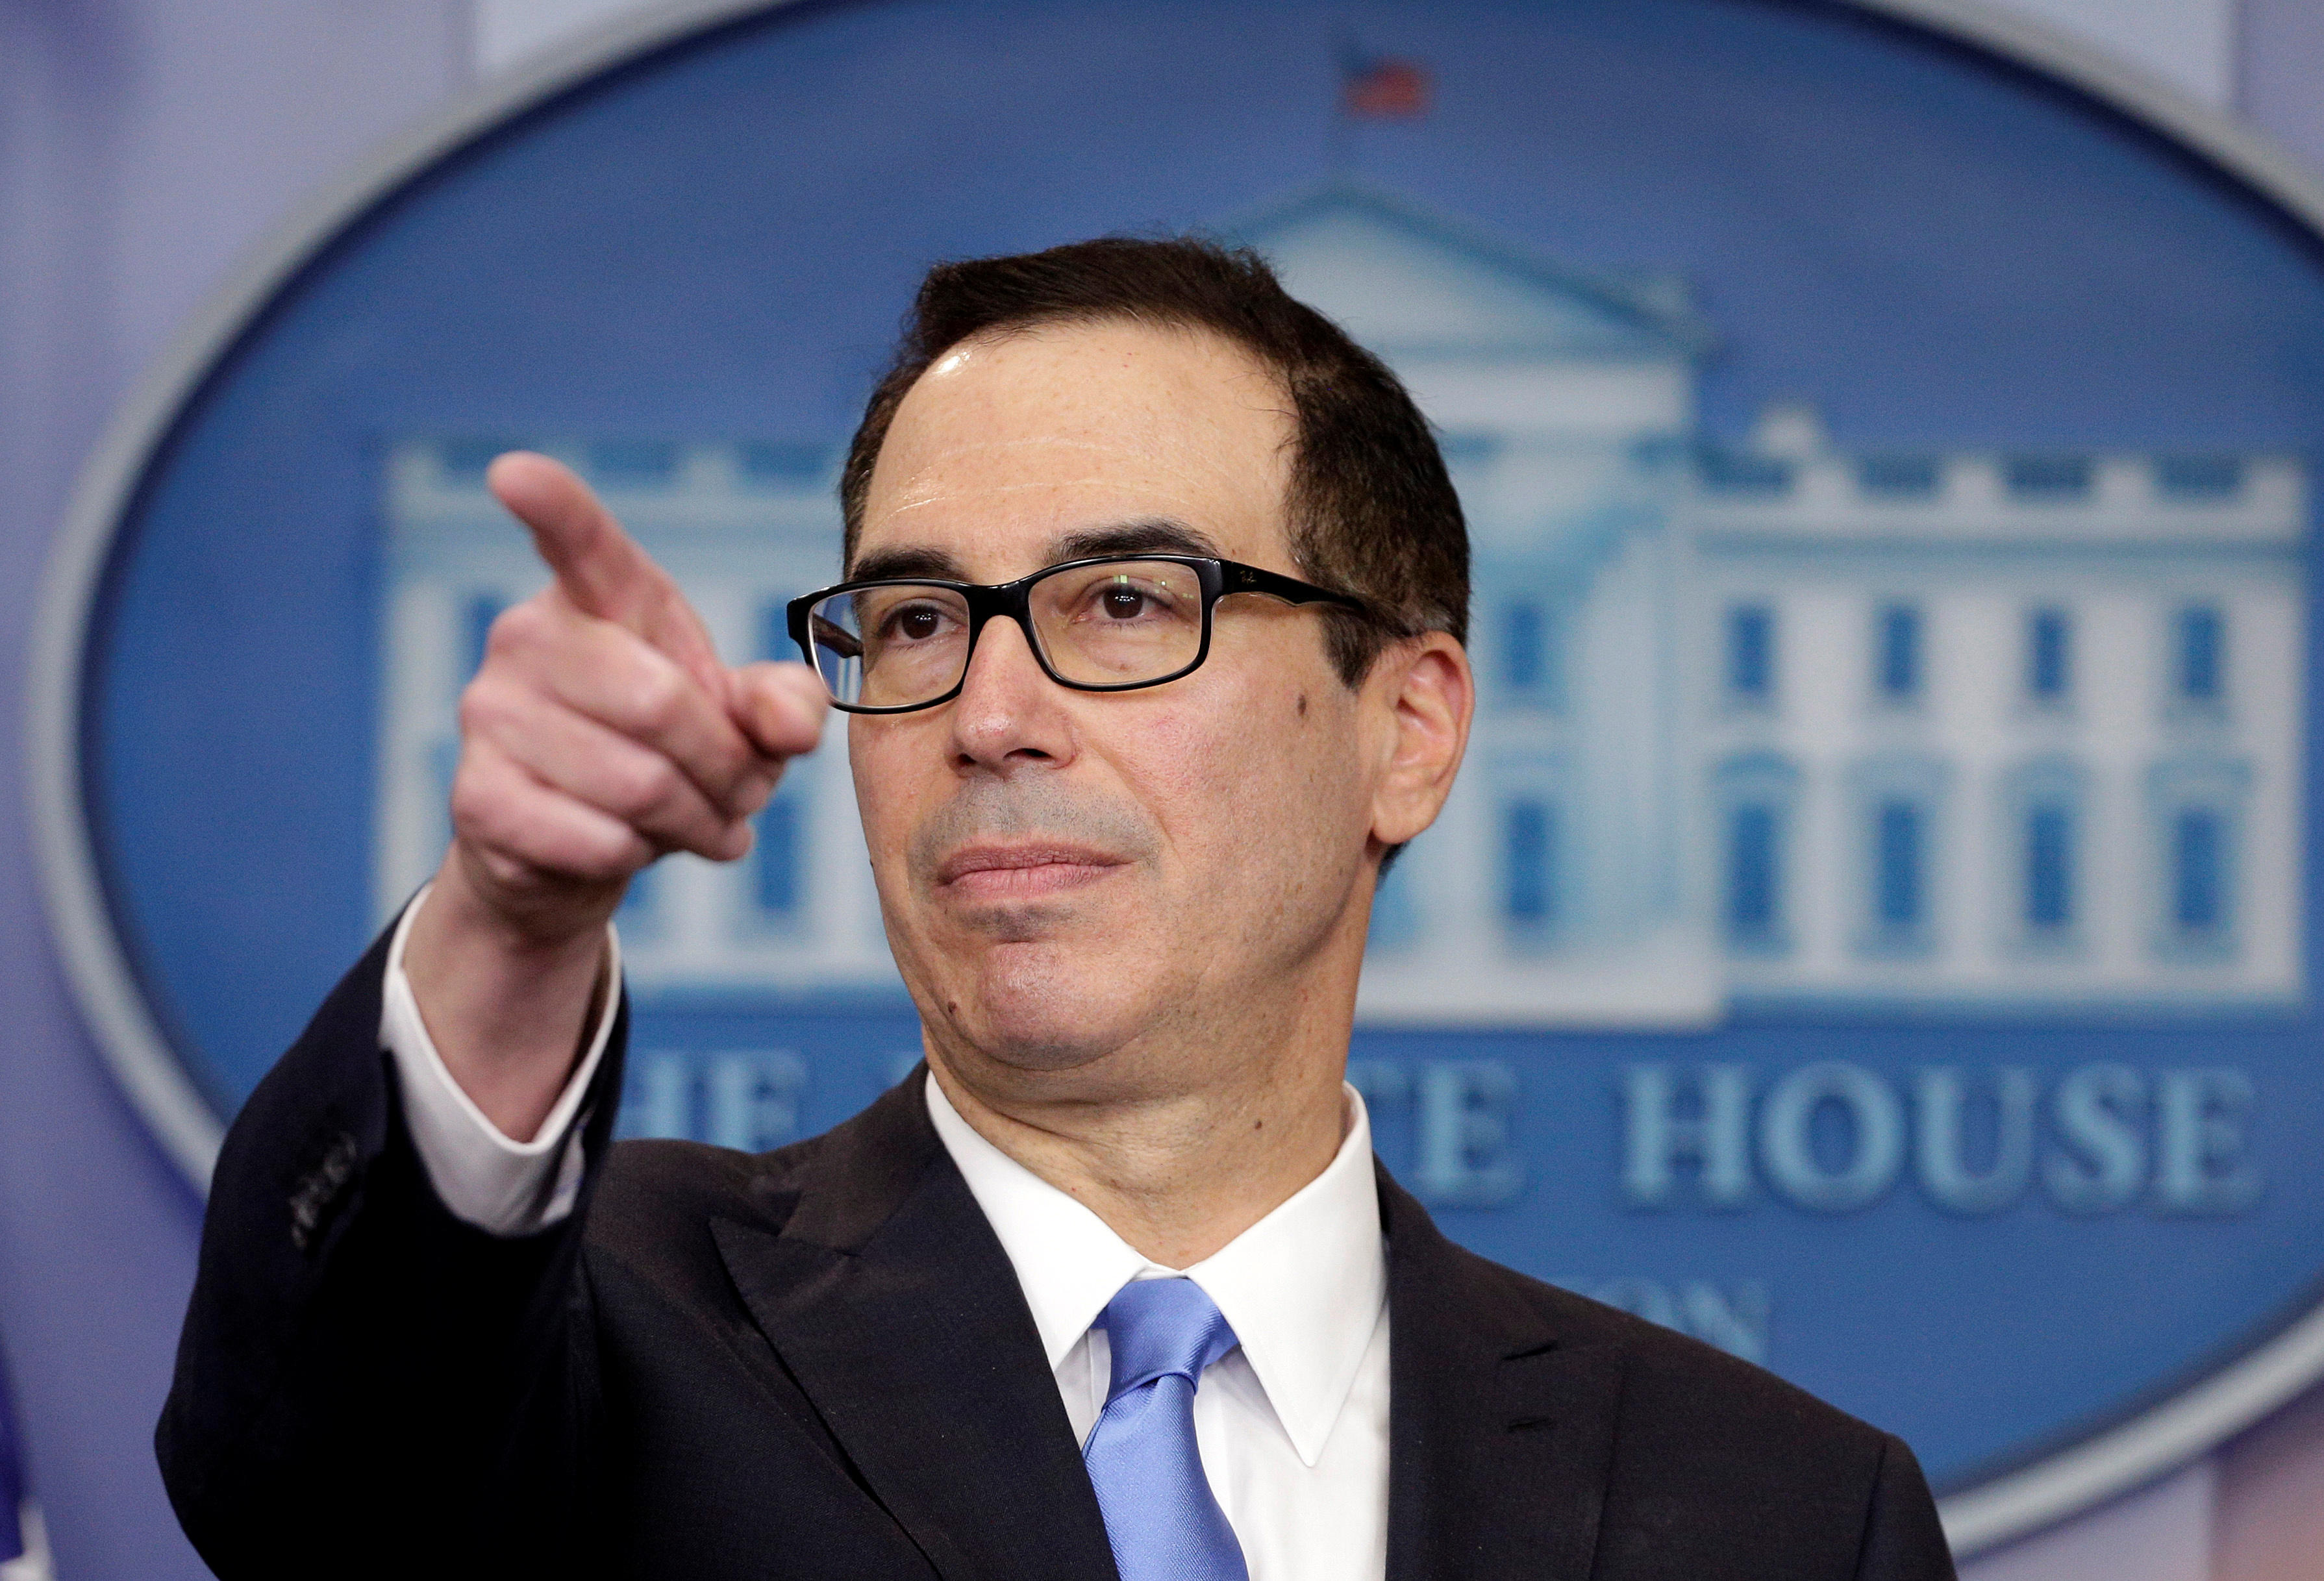 U.S. Secretary of the Treasury Steven Mnuchin takes a question during a press briefing at the White House in Washington, U.S., April 24, 2017.